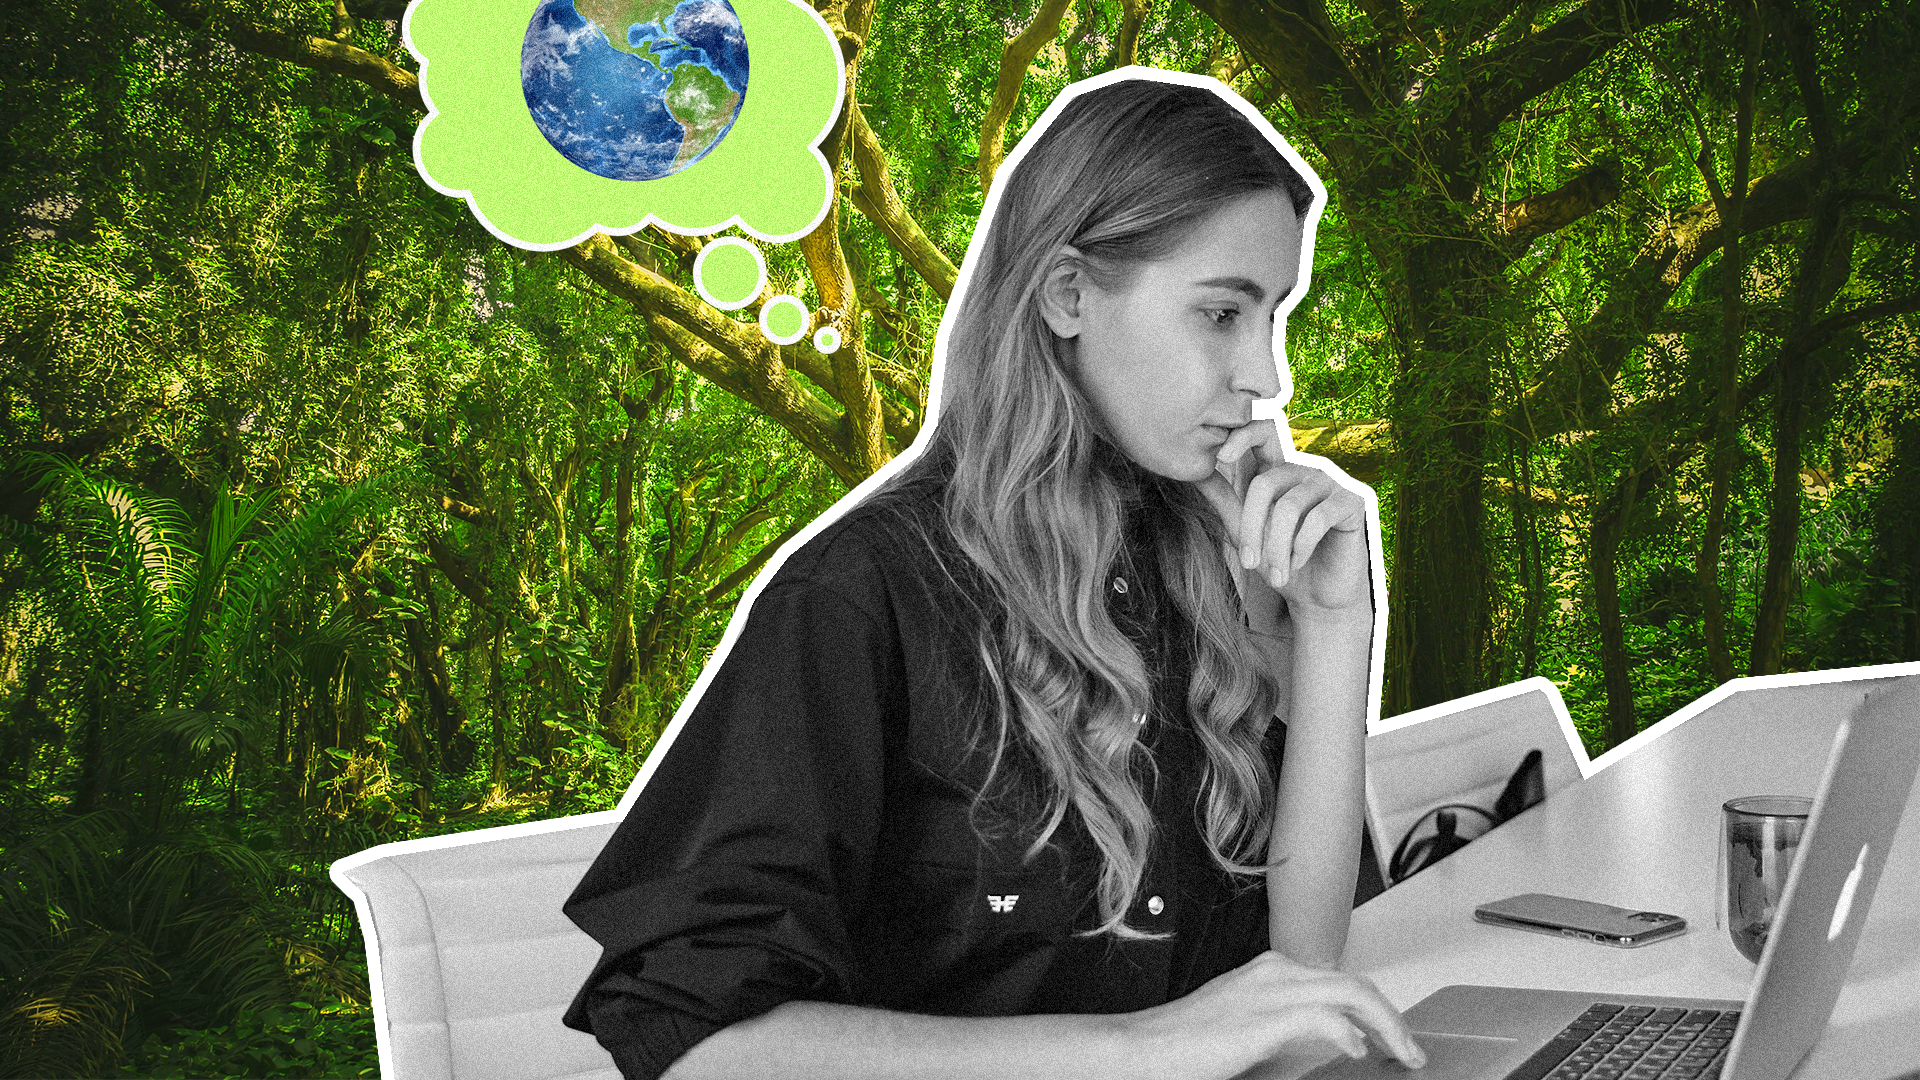 A woman applying for jobs with a thought bubble showing her thinking about the Earth